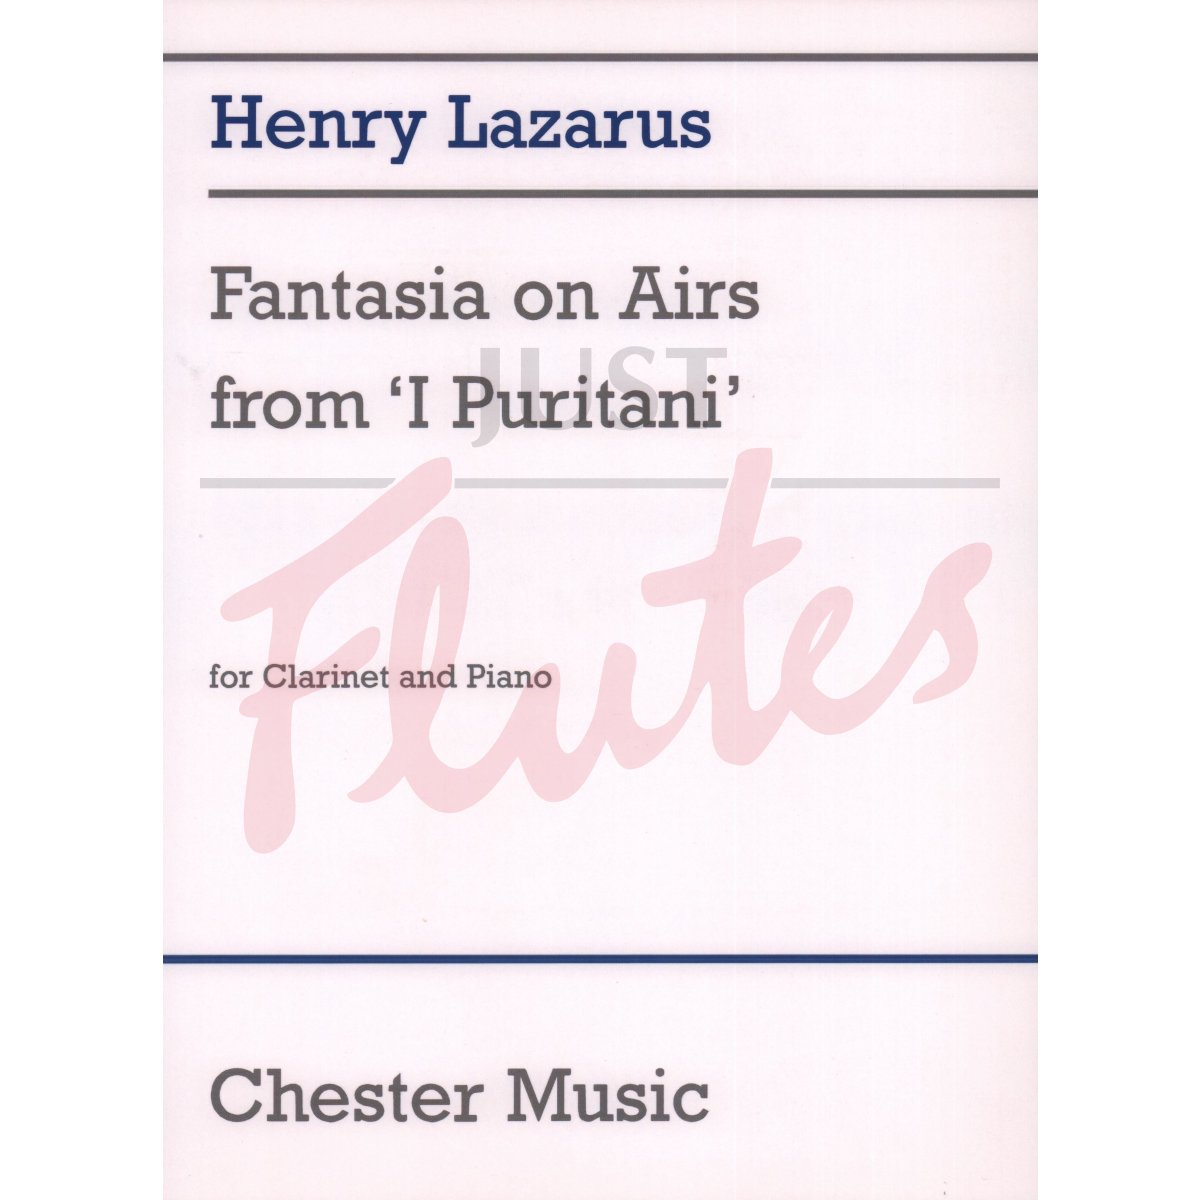 Fantasia on Airs from 'I Puritani' for Clarinet and Piano